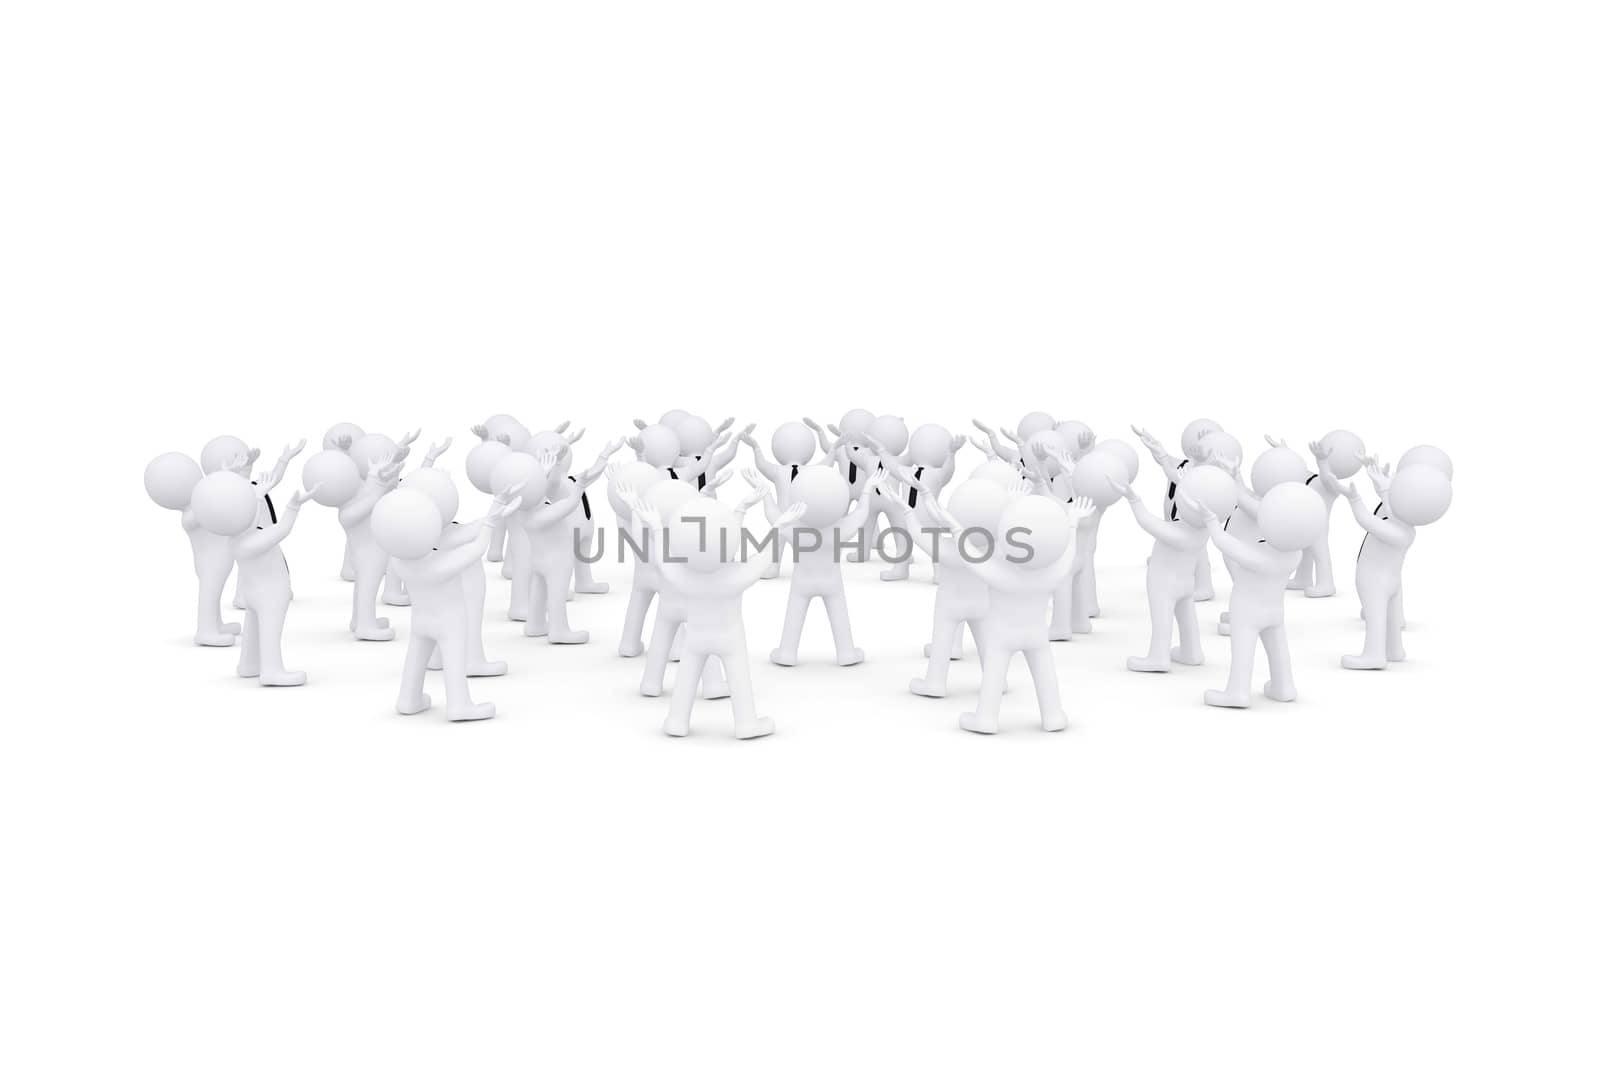 Group of white people raised their hands. 3d render isolated on white background